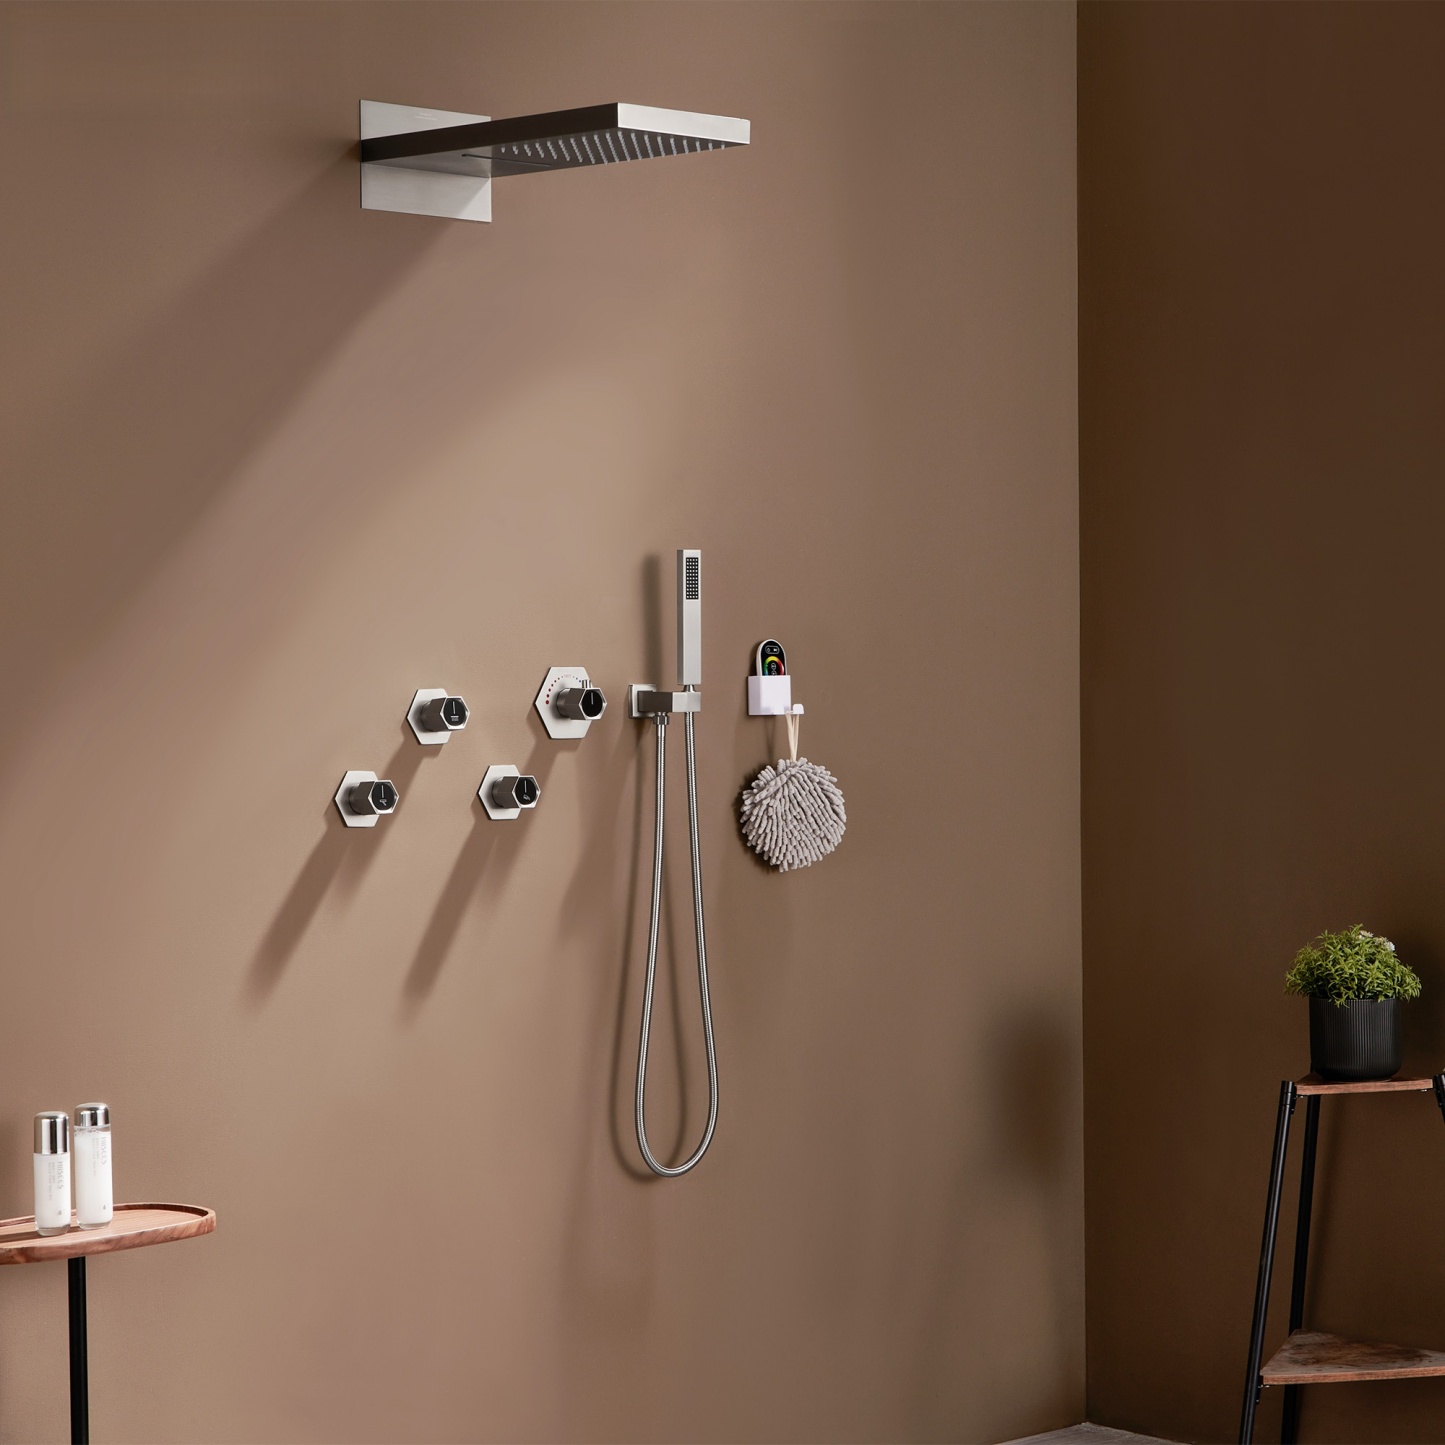 3 Functions Wall-Mounted Luxury LED and Music Thermostatic Complete Shower System Rough-in Valve Included